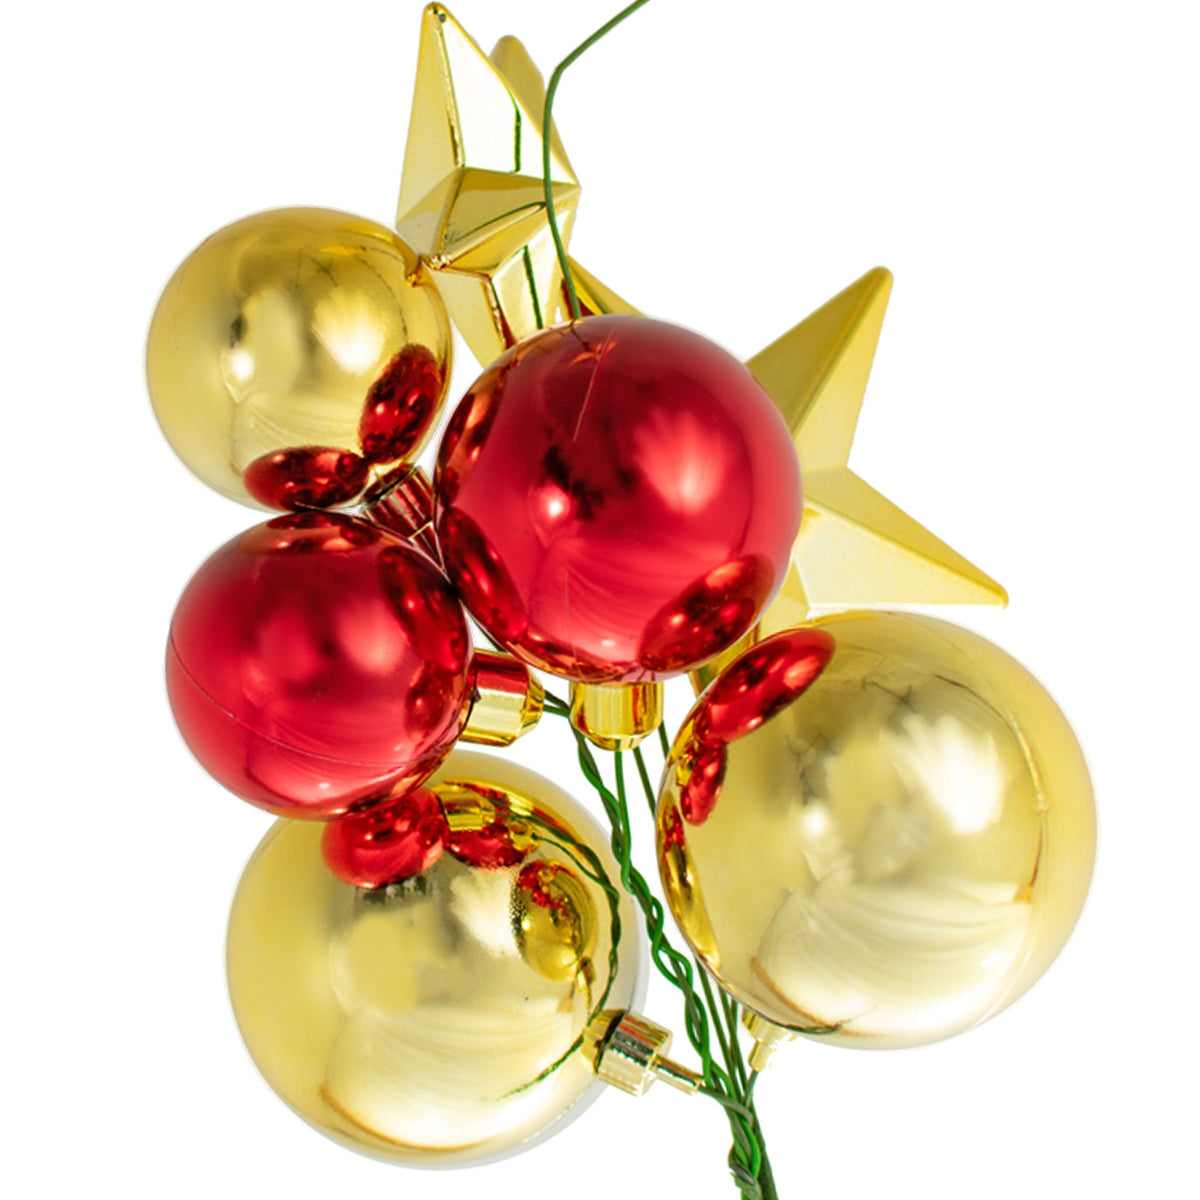 Colors include:  2 - Shiny Red Ball Ornaments (60MM & 50MM) 3 - Shiny Gold Ball Ornaments (70MM & 50MM) 3 - Shiny Gold Stars